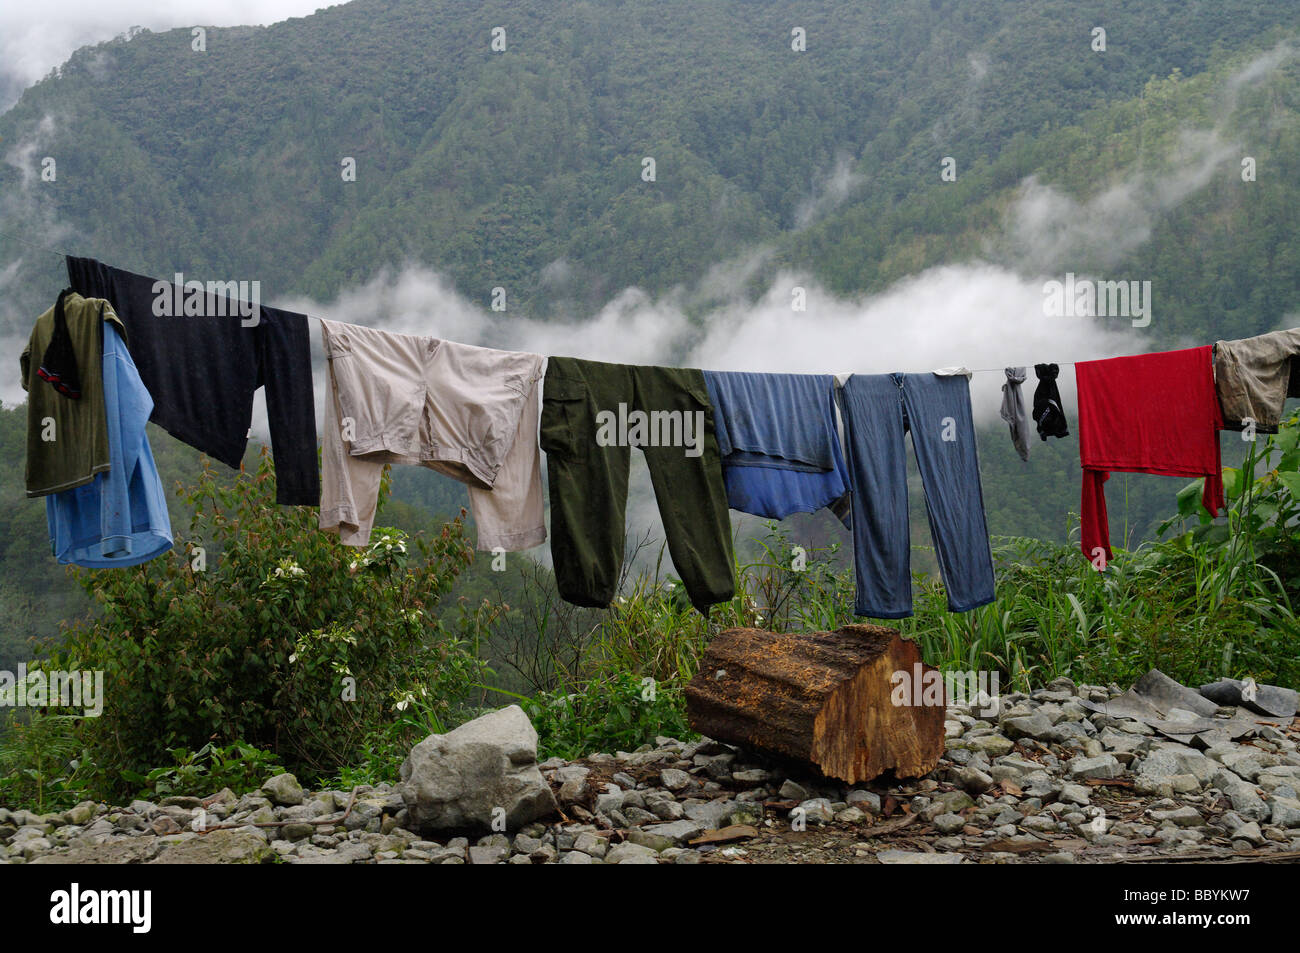 Washing hanging on a line near Bontoc, Mountain Province, North Luzon, Philippines Stock Photo